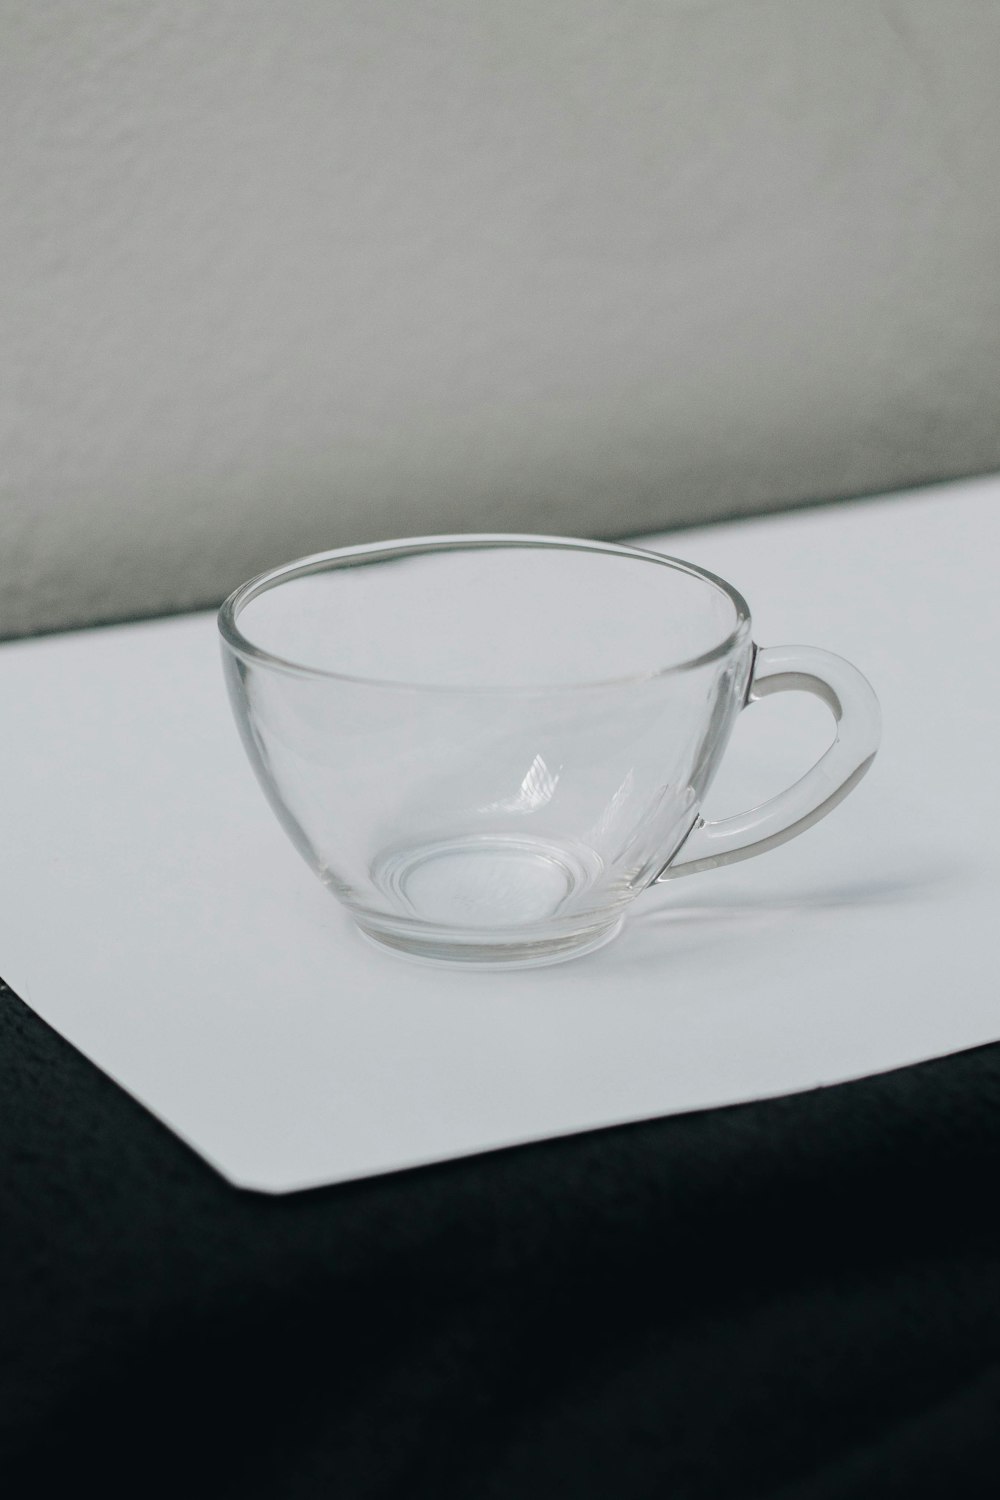 clear glass cup on white tissue paper